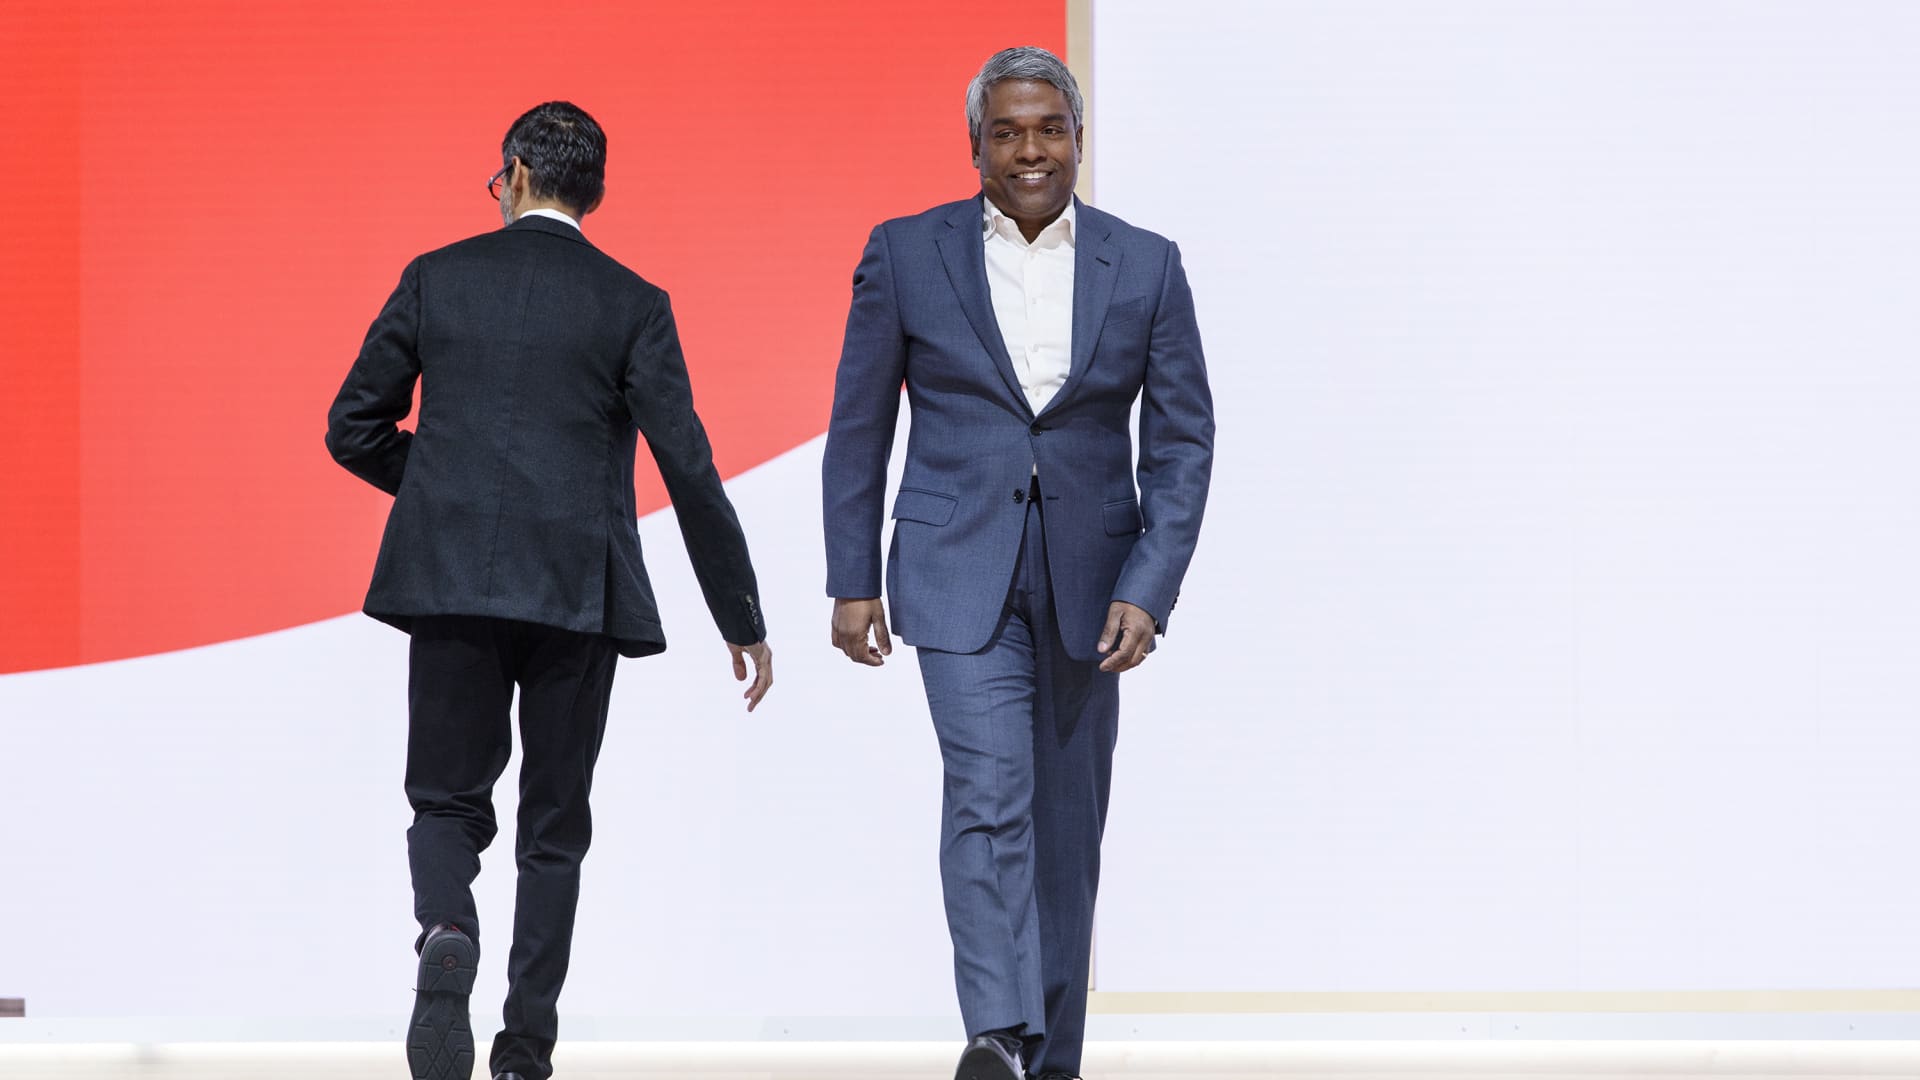 Google Cloud boss Kurian's rocky path to profit: 'We were not in a very good situation'